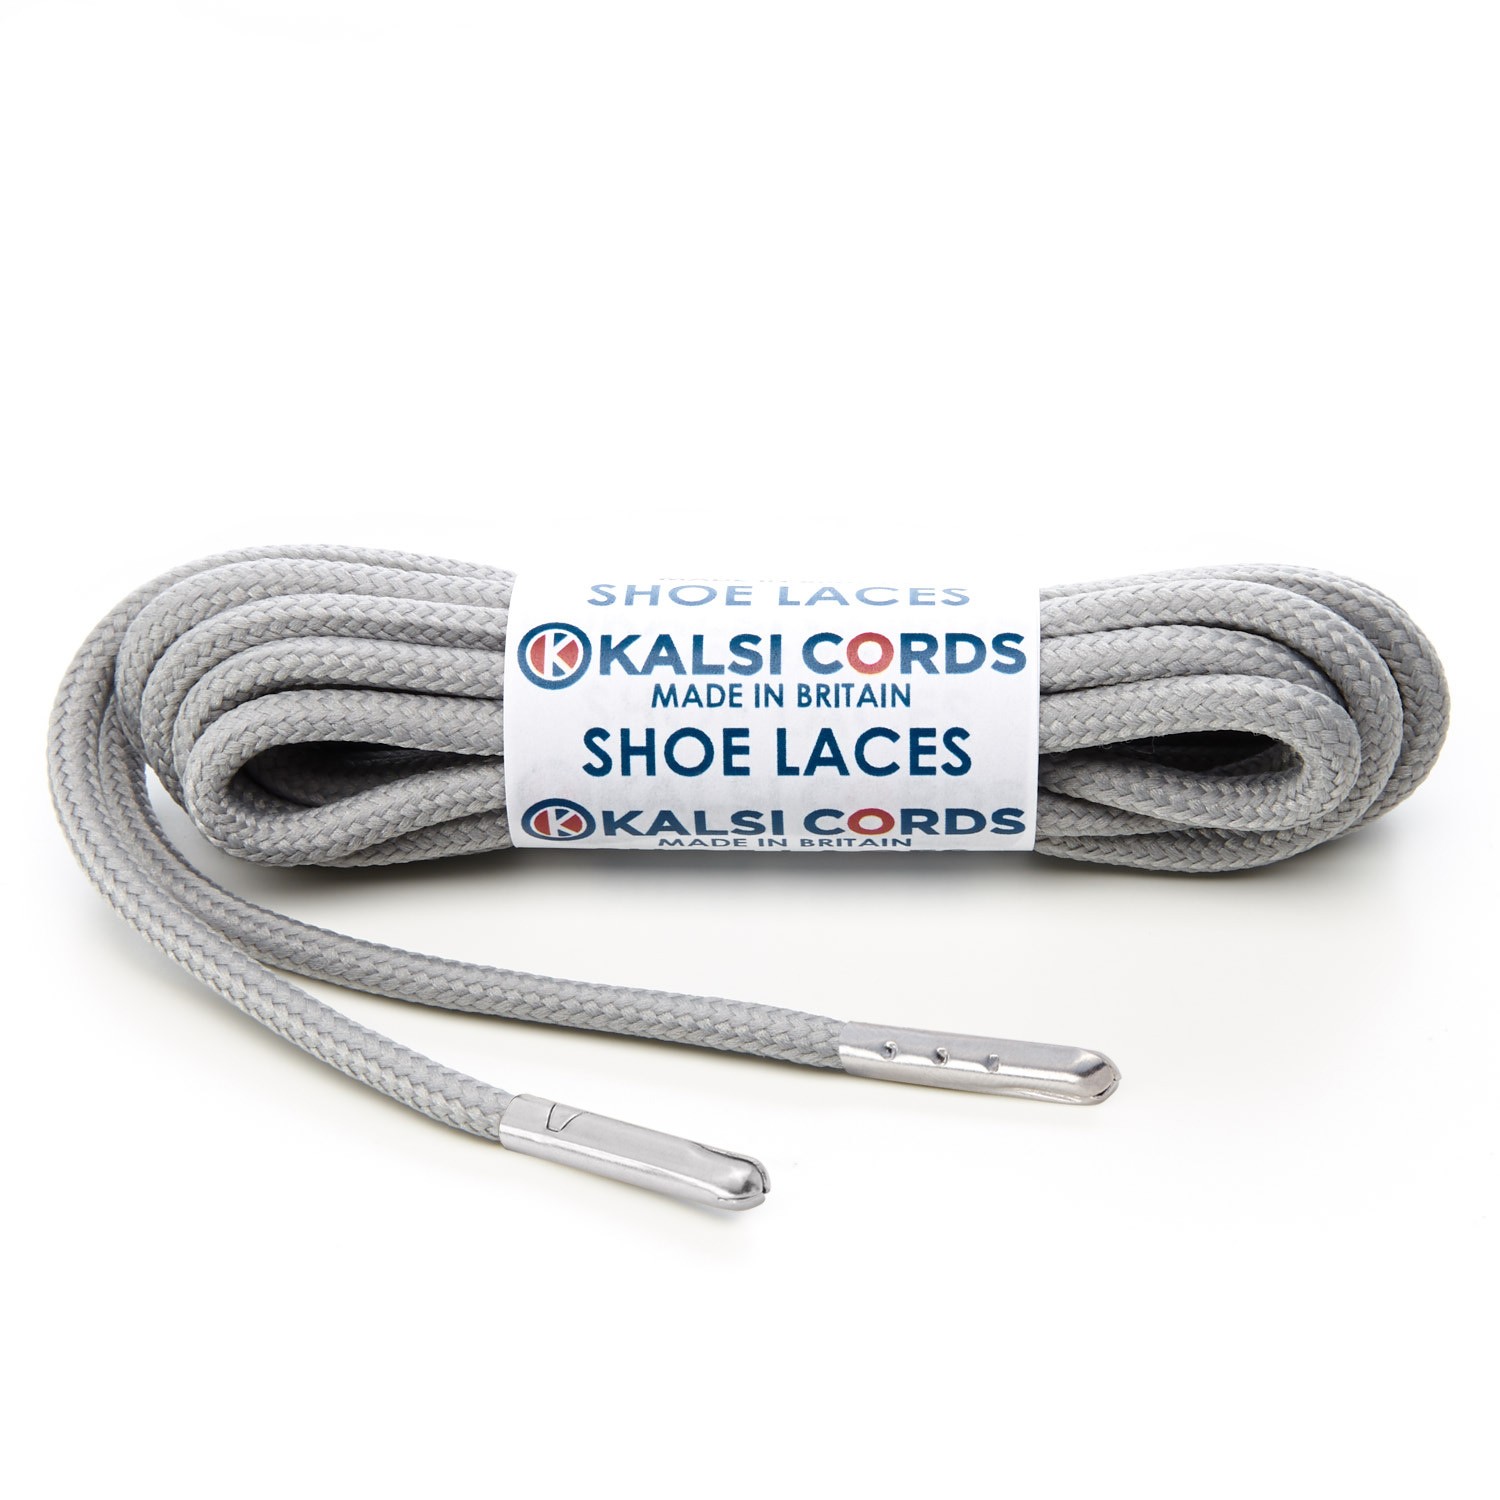 T621 5mm Round Polyester Shoe Laces Light Grey 1 Silver Metal Tip Kalsi Cords